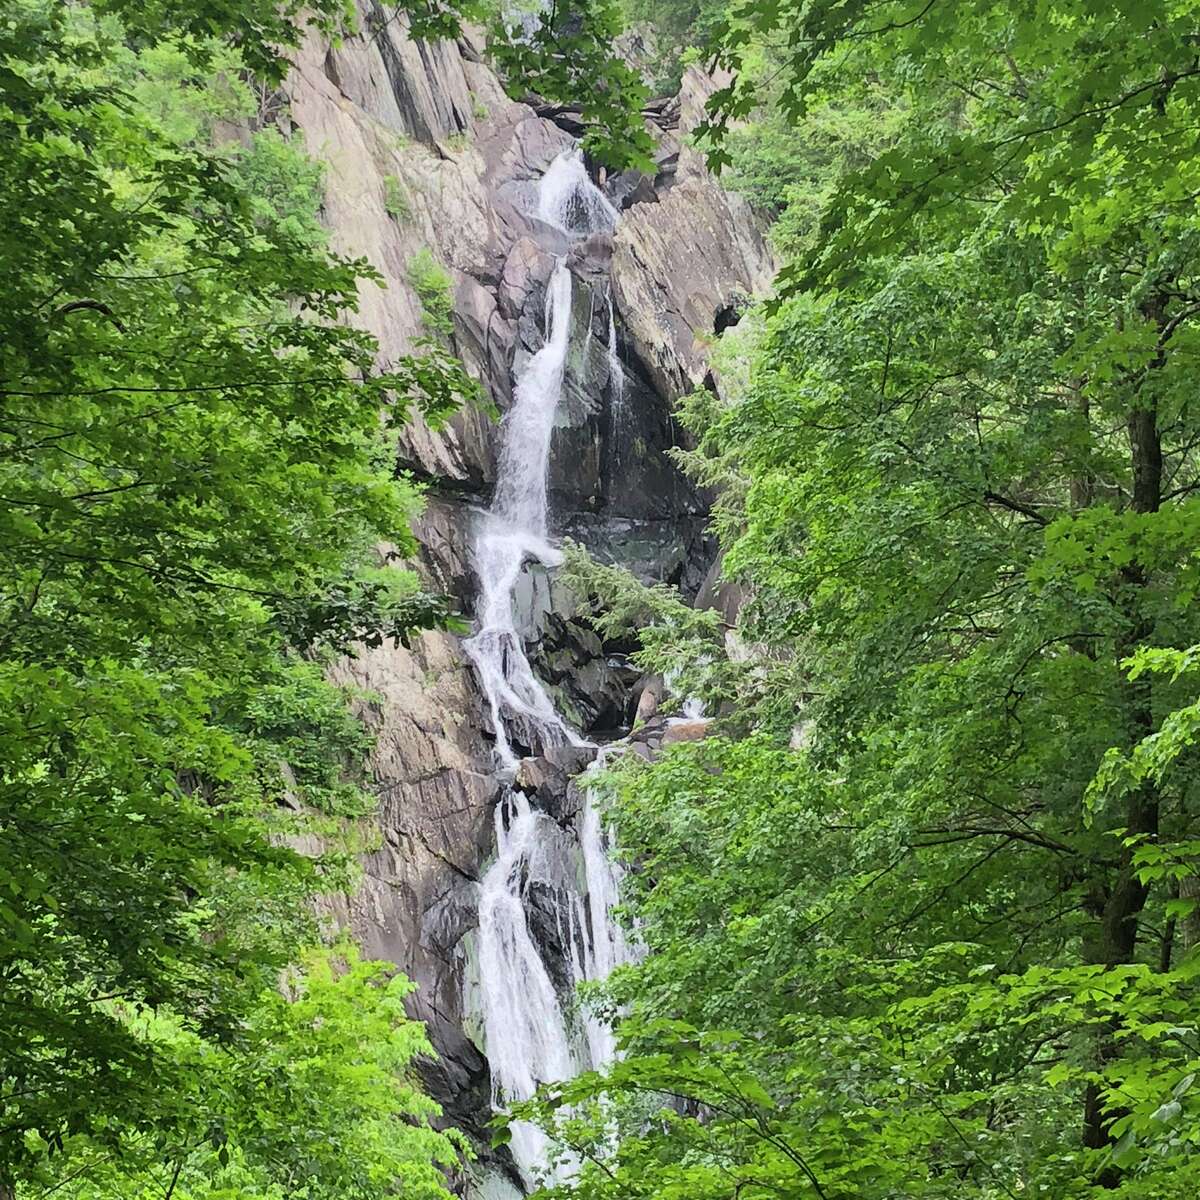 While in Philmont, take a short hike to see Agawamuck Creek’s 250-foot plunge into a gorge, over a series of cascading falls.